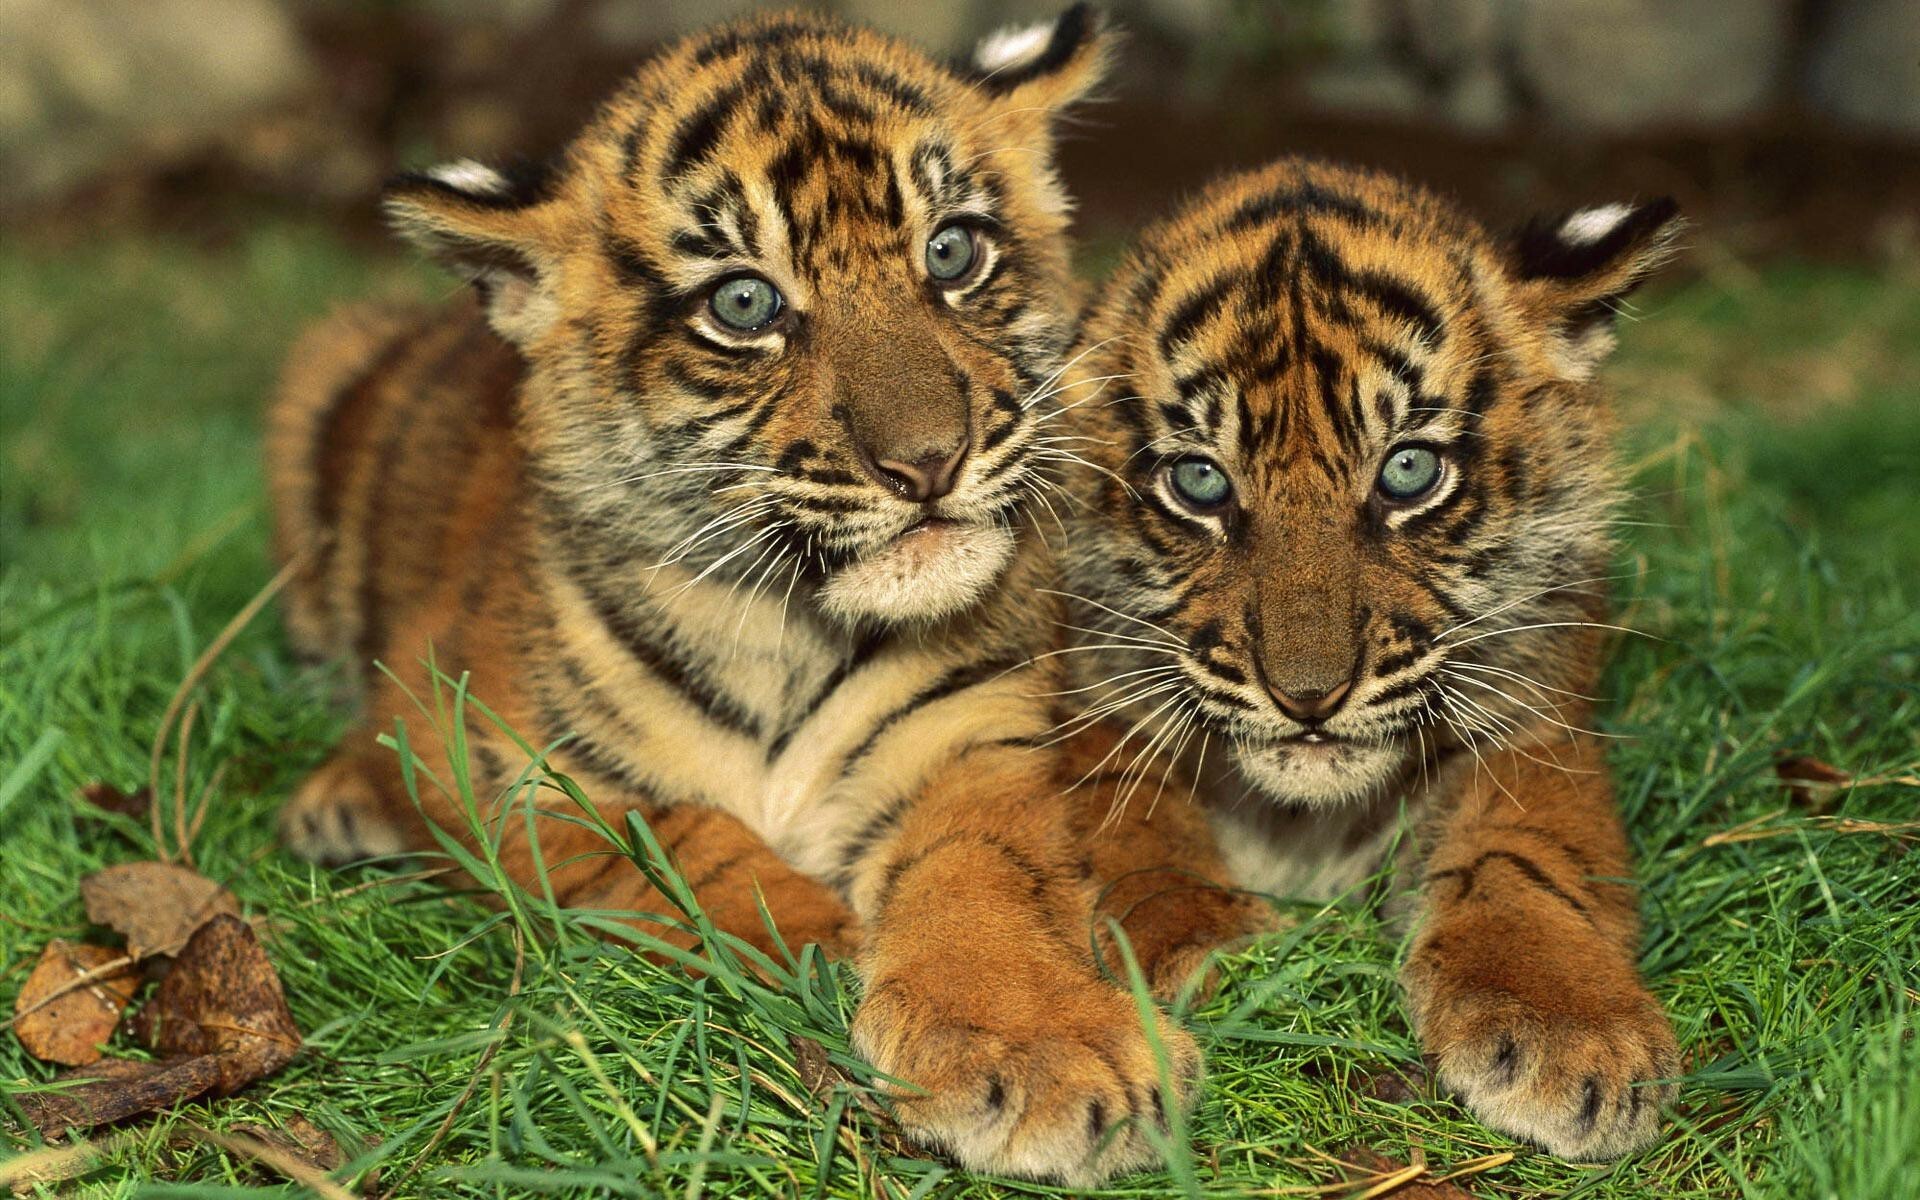 Cute baby tiger, 4K monitor delight, Aww-worthy wallpaper, Adorable and charming, 1920x1200 HD Desktop